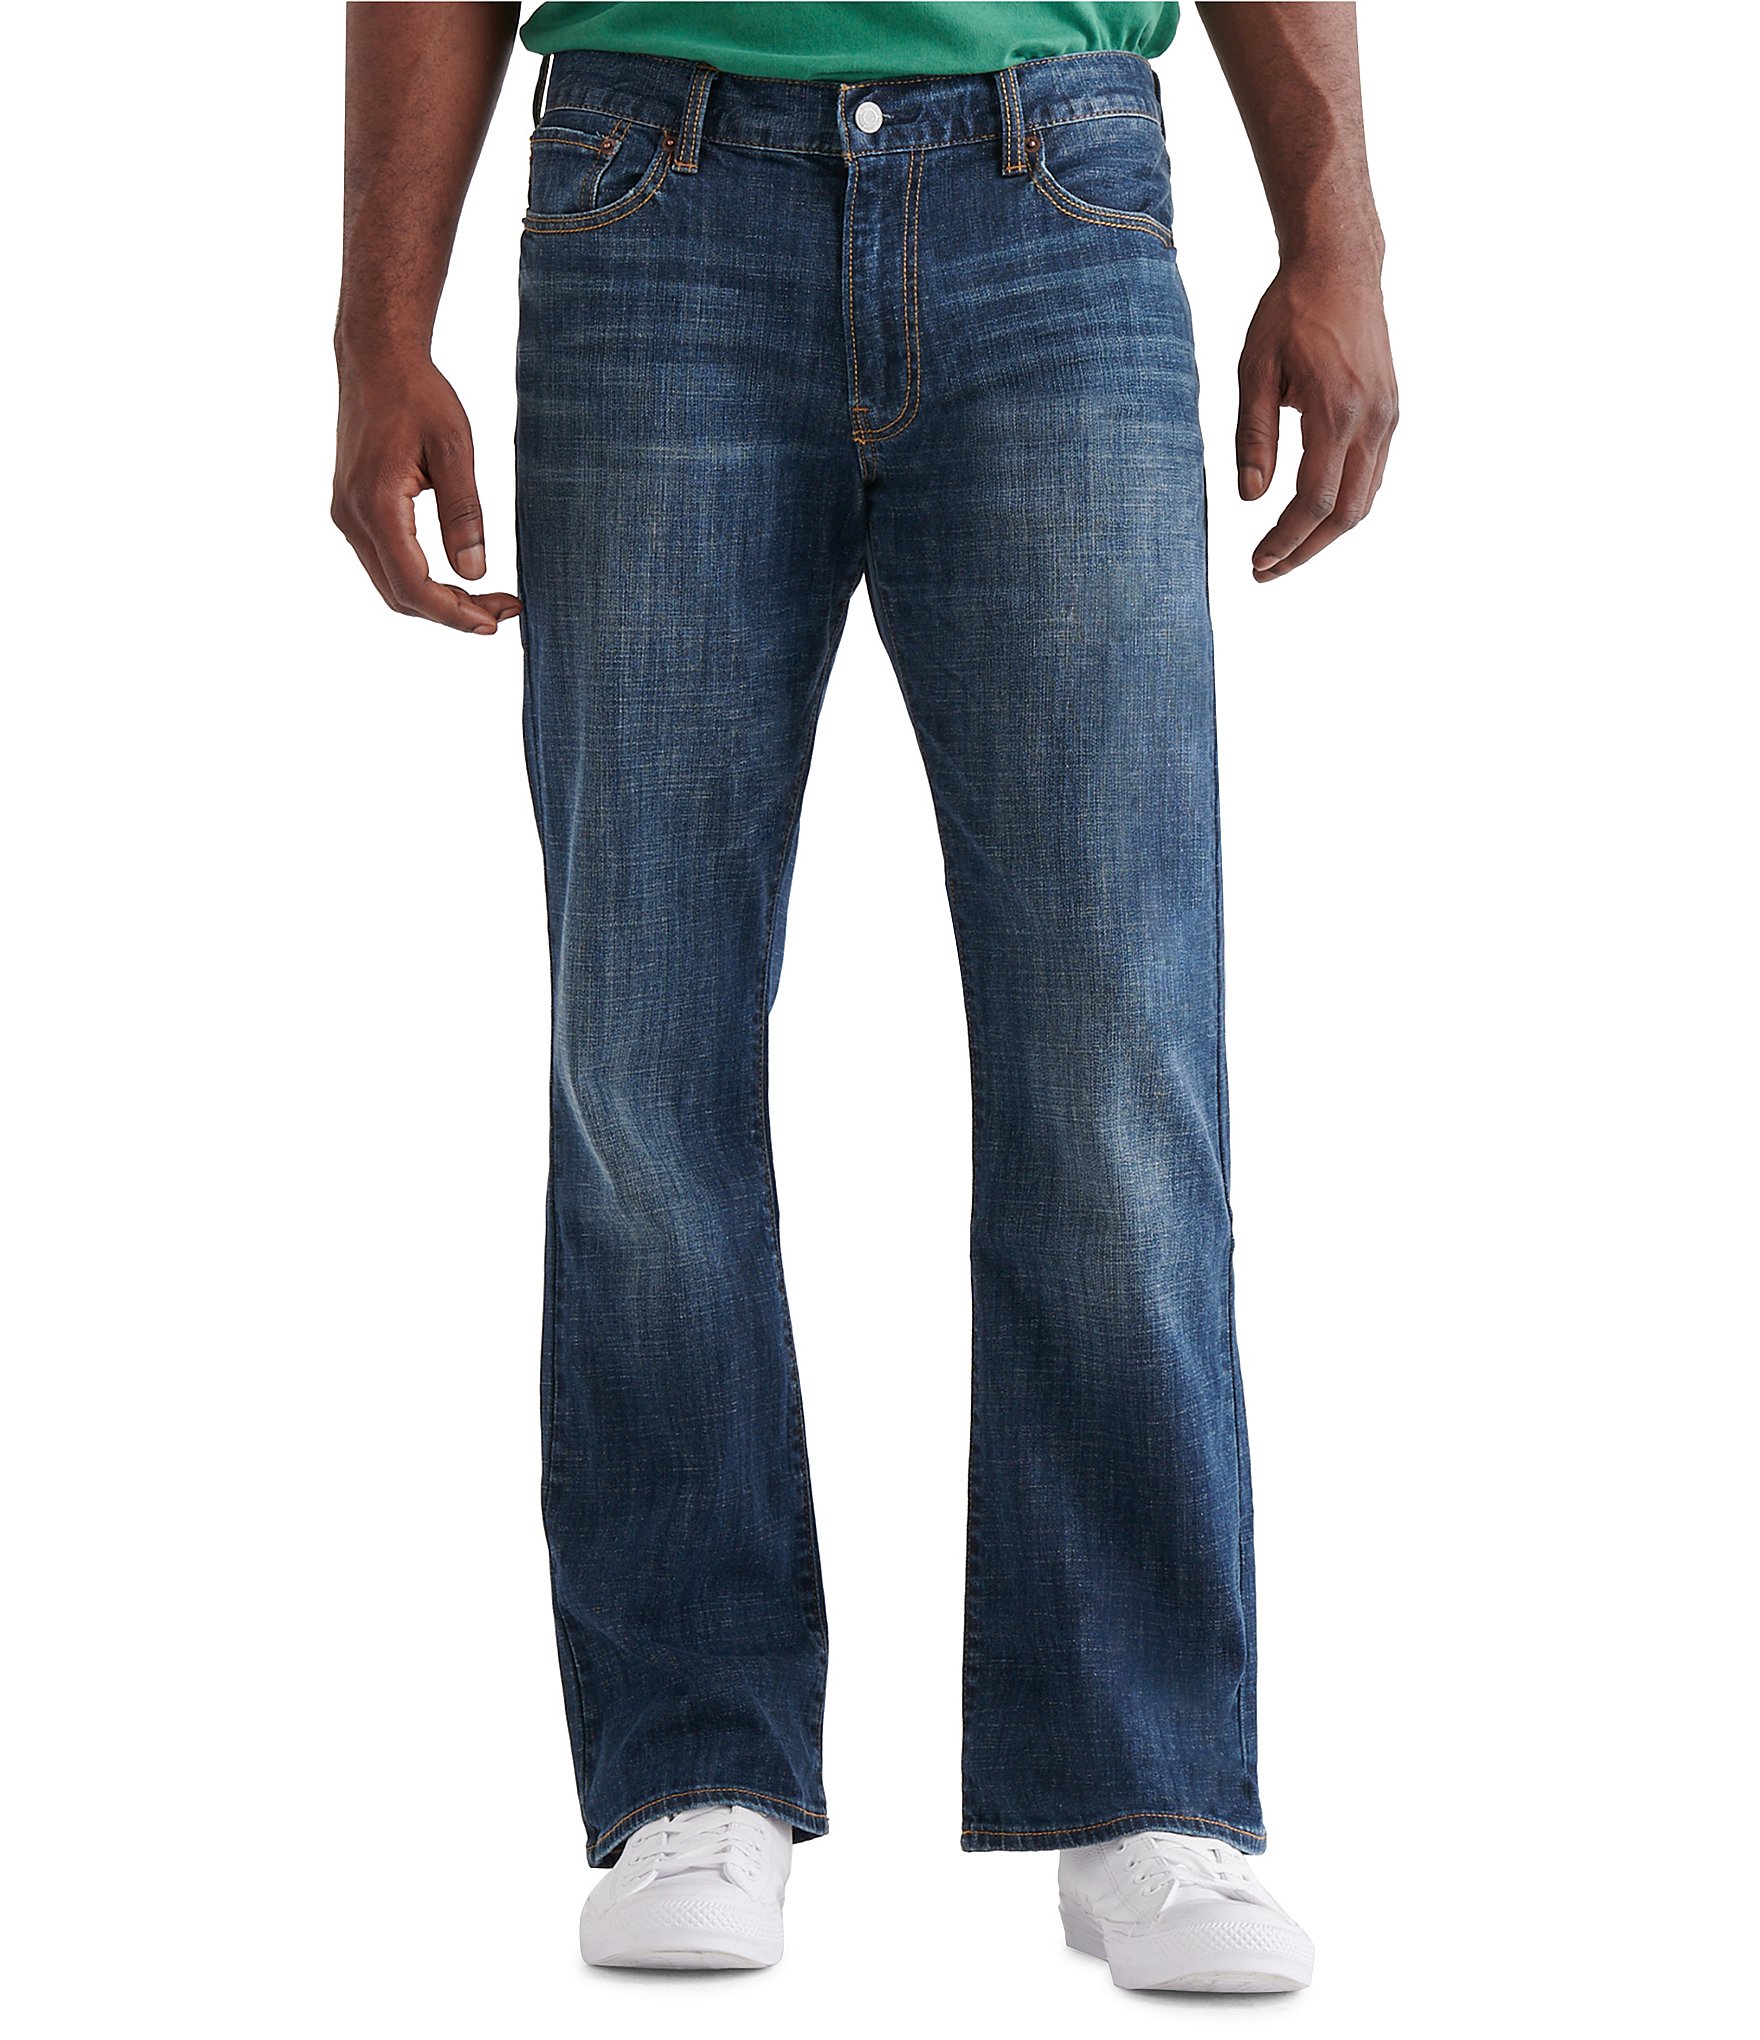 Shop Bootcut Jeans Collection for Jeans Online